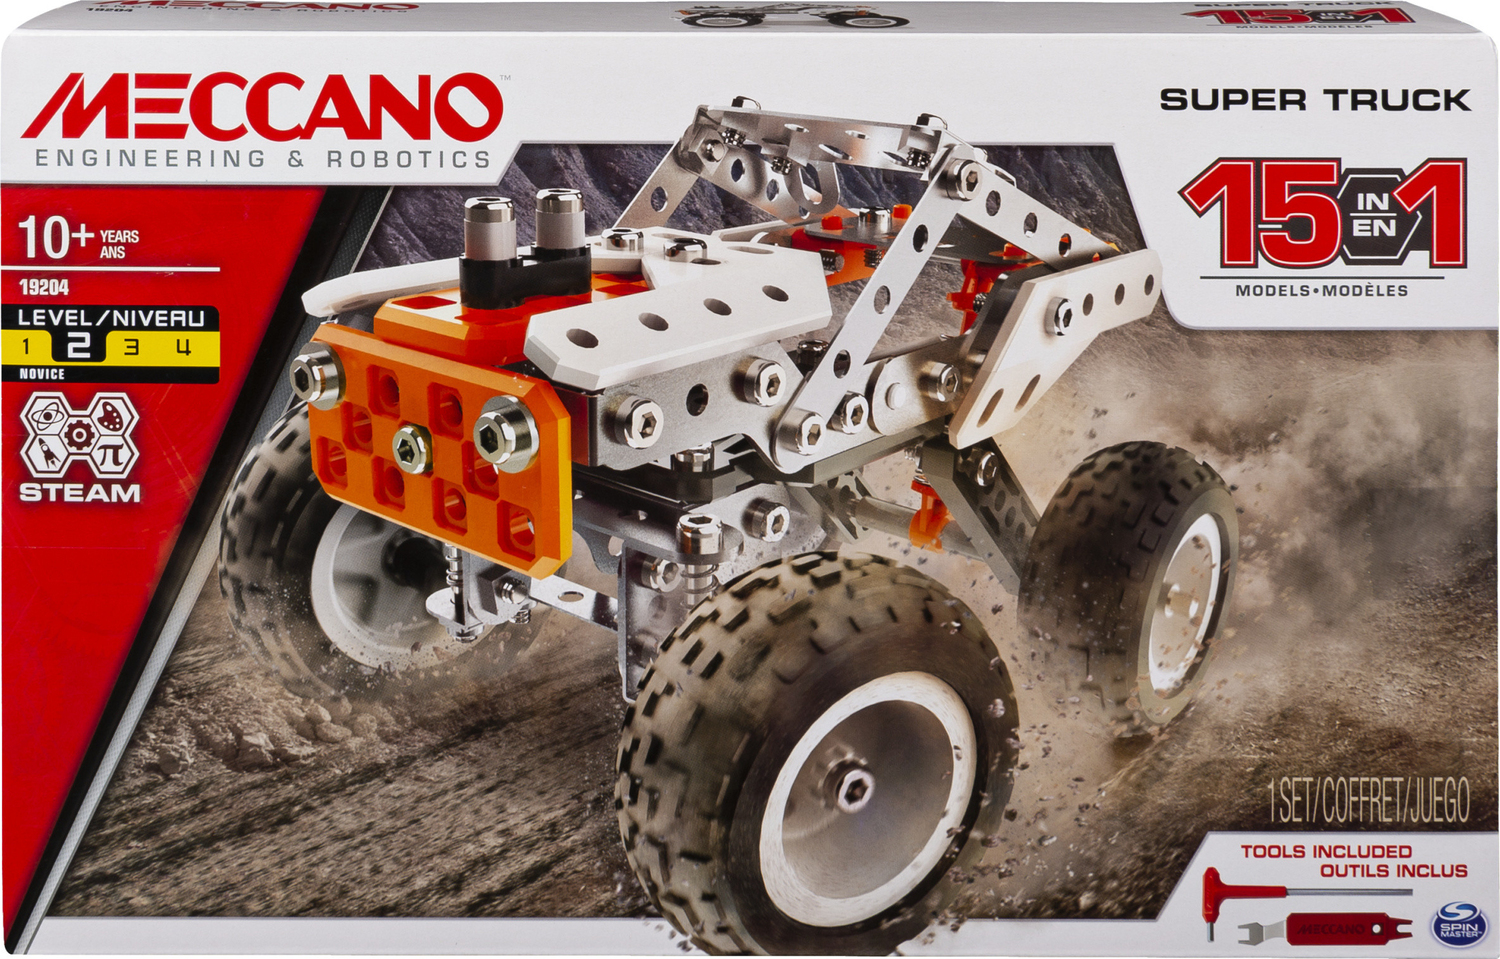 Meccano, 15-in-1 Super Truck, S.T.E.A.M. Building Kit, for Ages 10 and Up